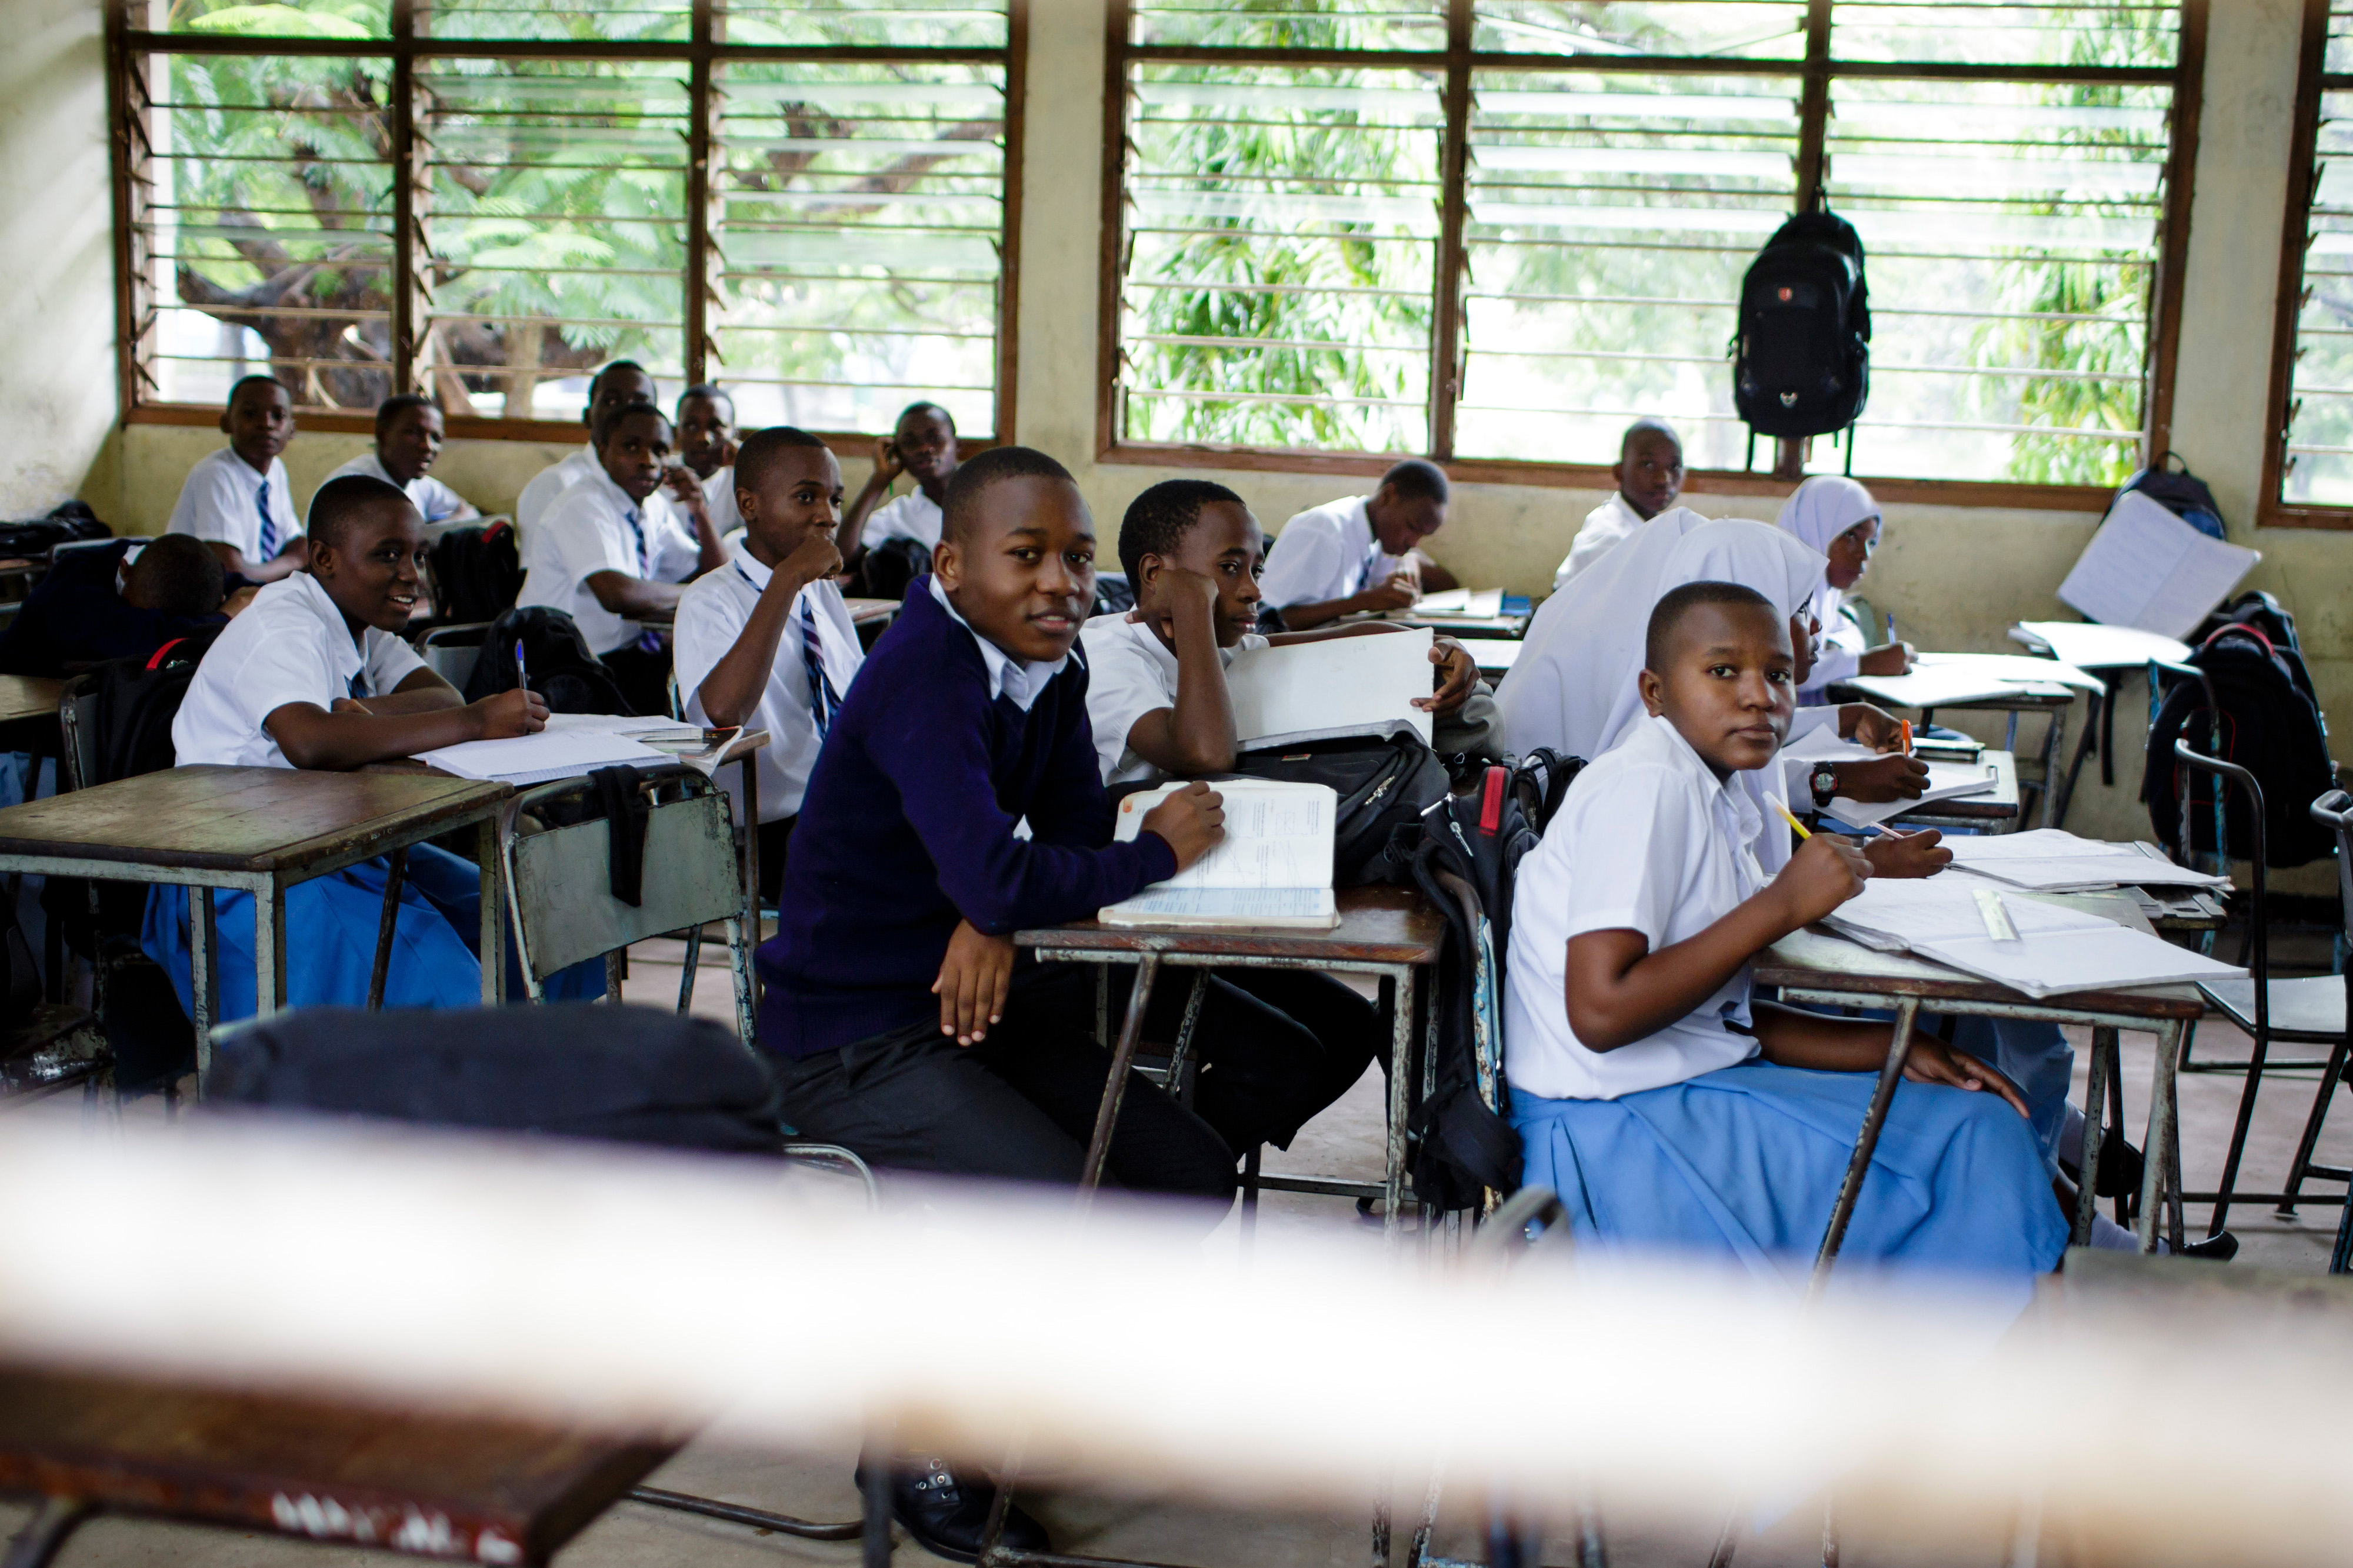 School lessons in Dar es Salaam, the largest city in Tanzania